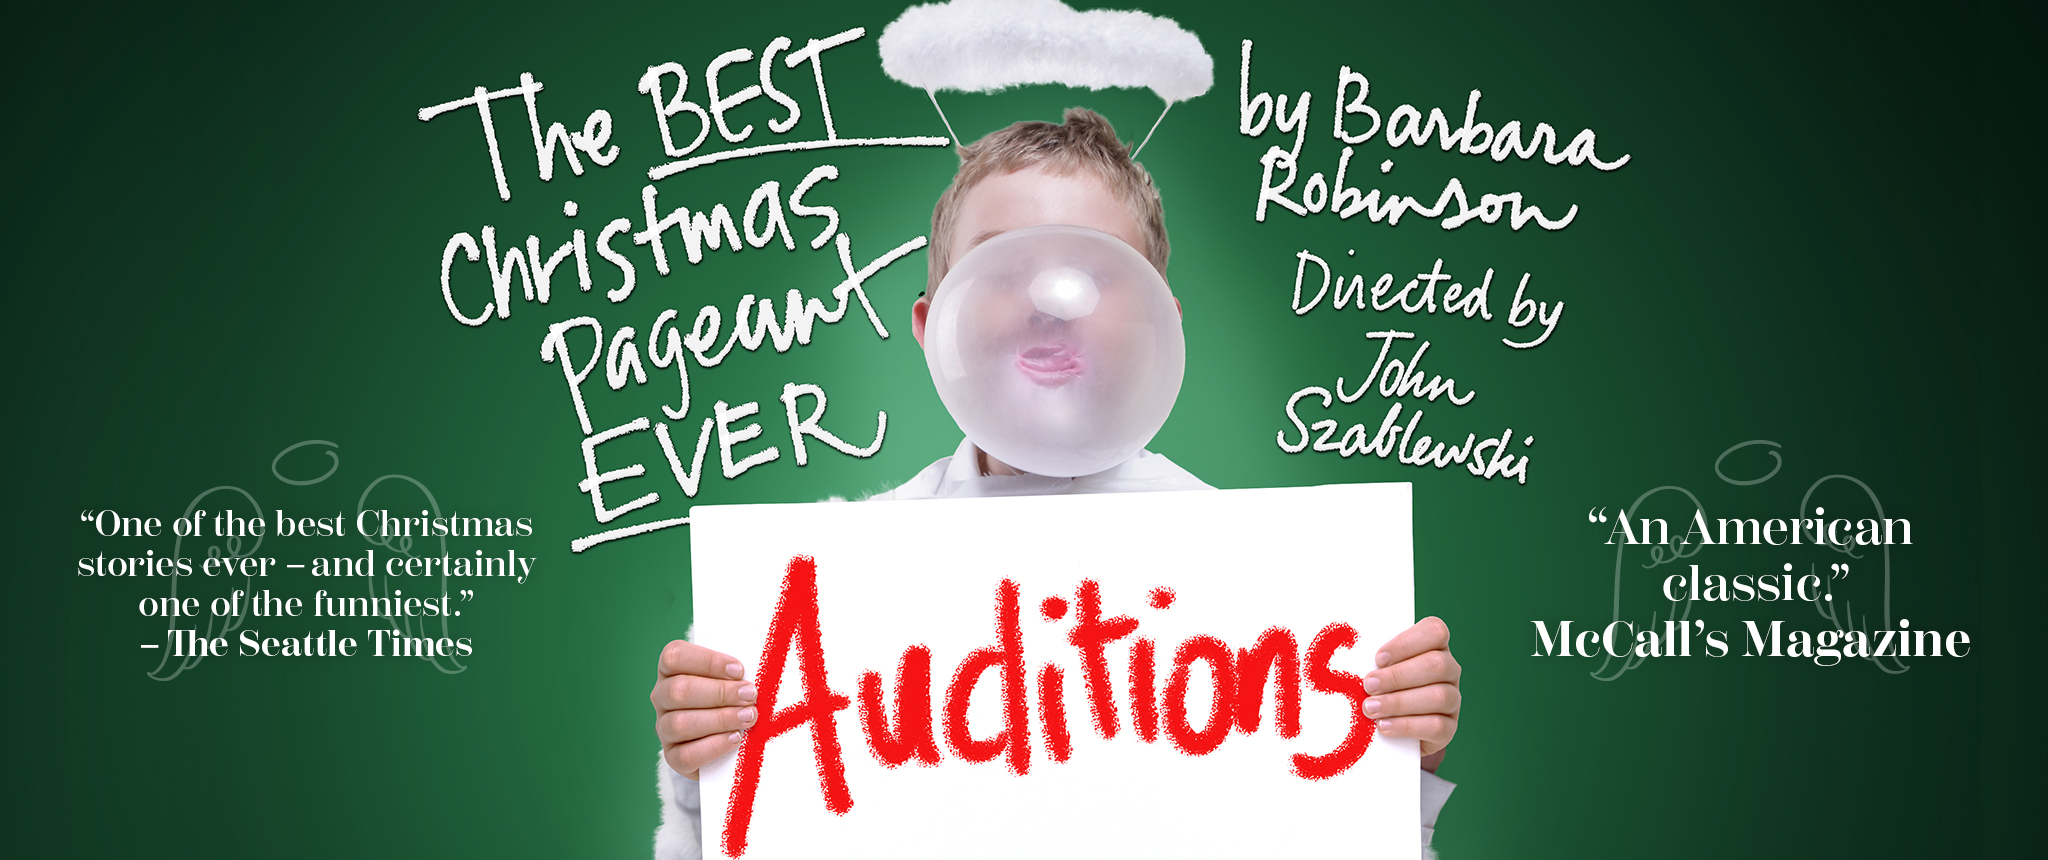 Auditions The Best Christmas Pageant Ever Aurora Players